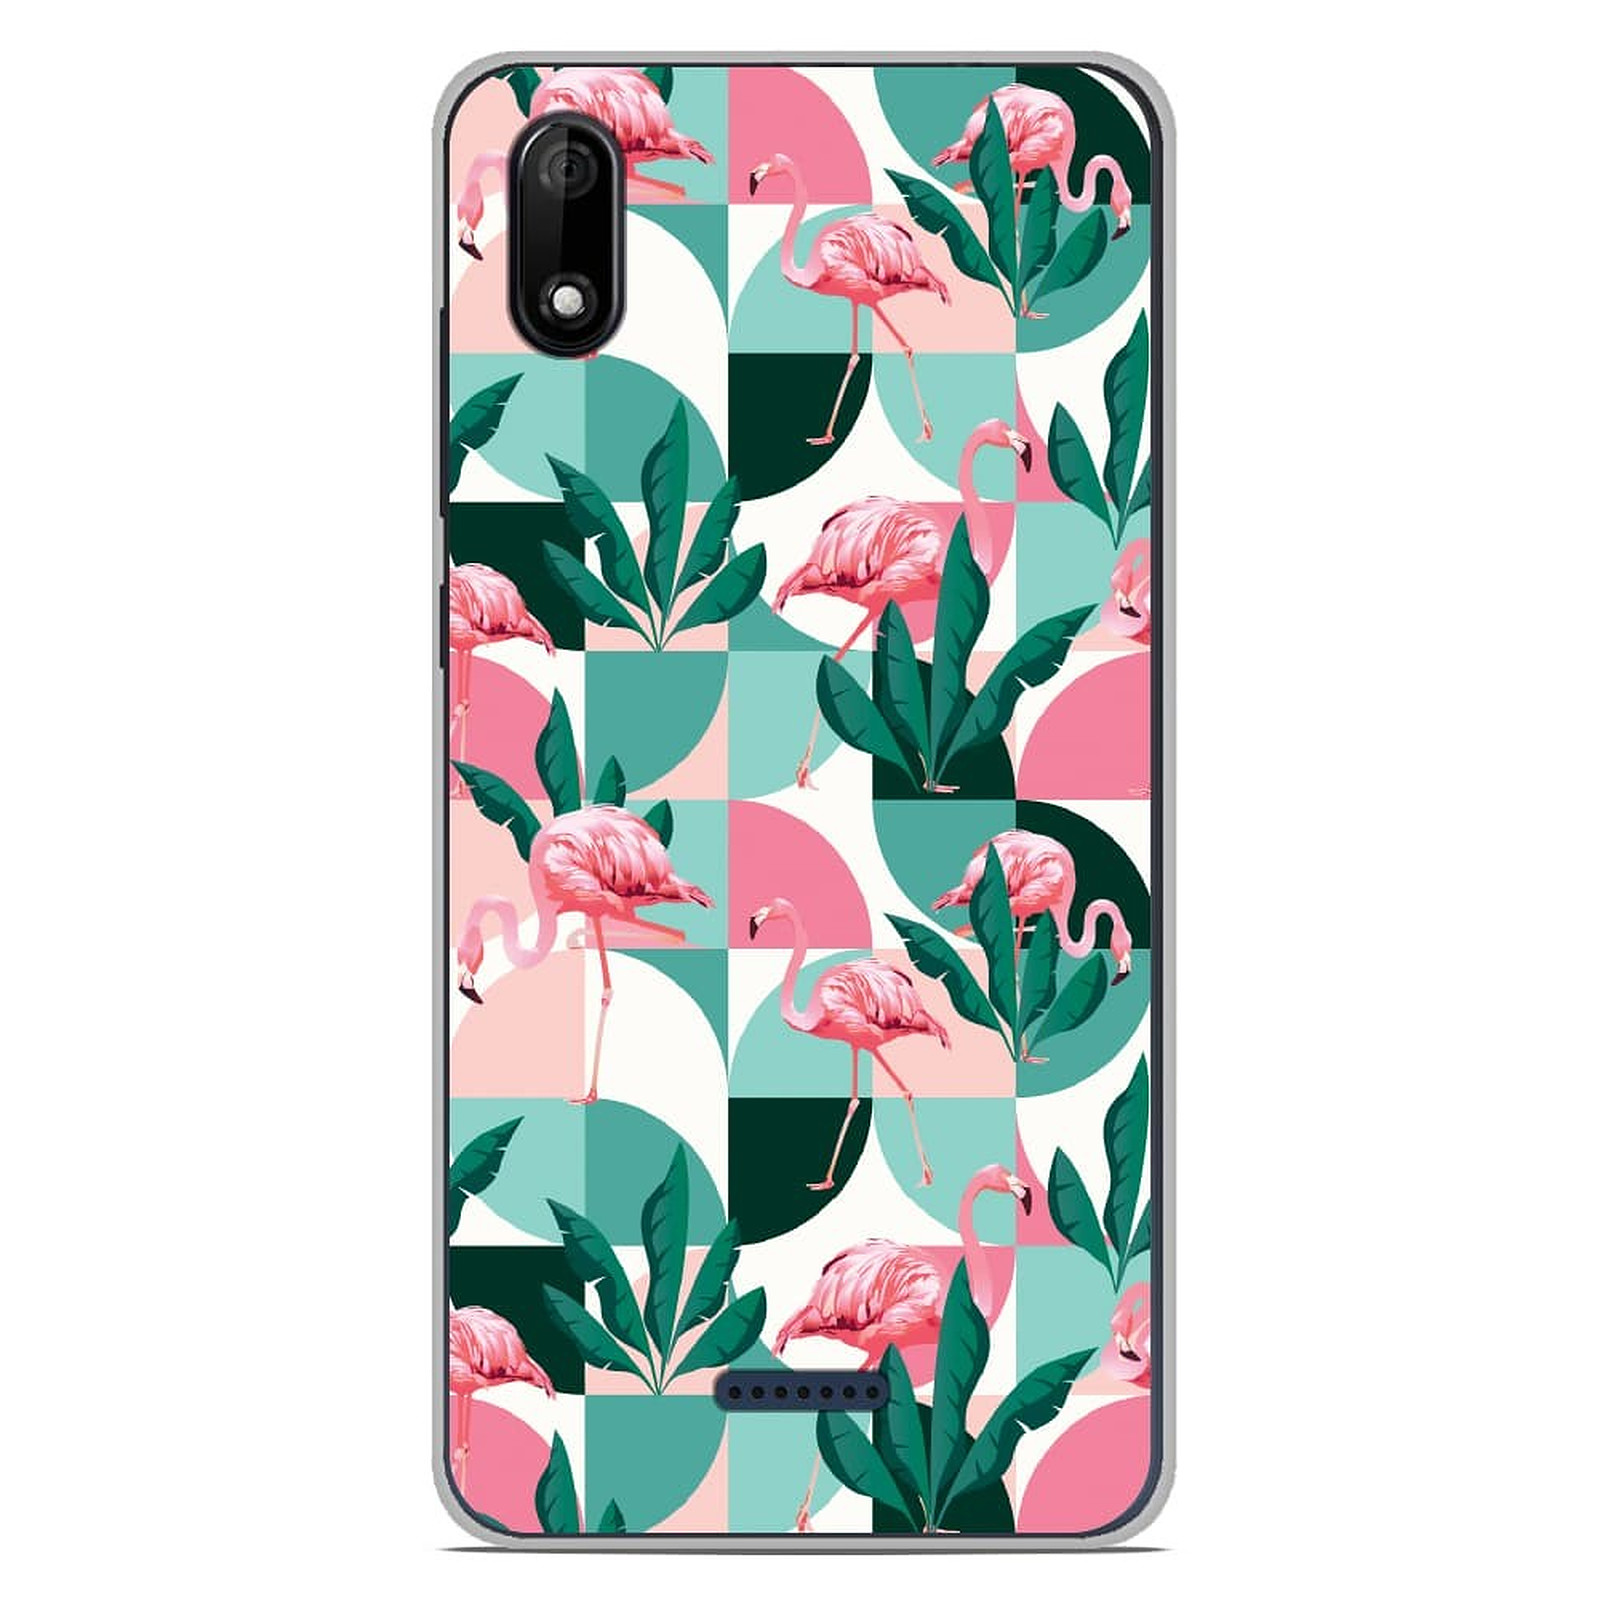 1001 Coques Coque silicone gel Wiko Y60 motif Flamants Roses ge´ome´trique - Coque telephone 1001Coques